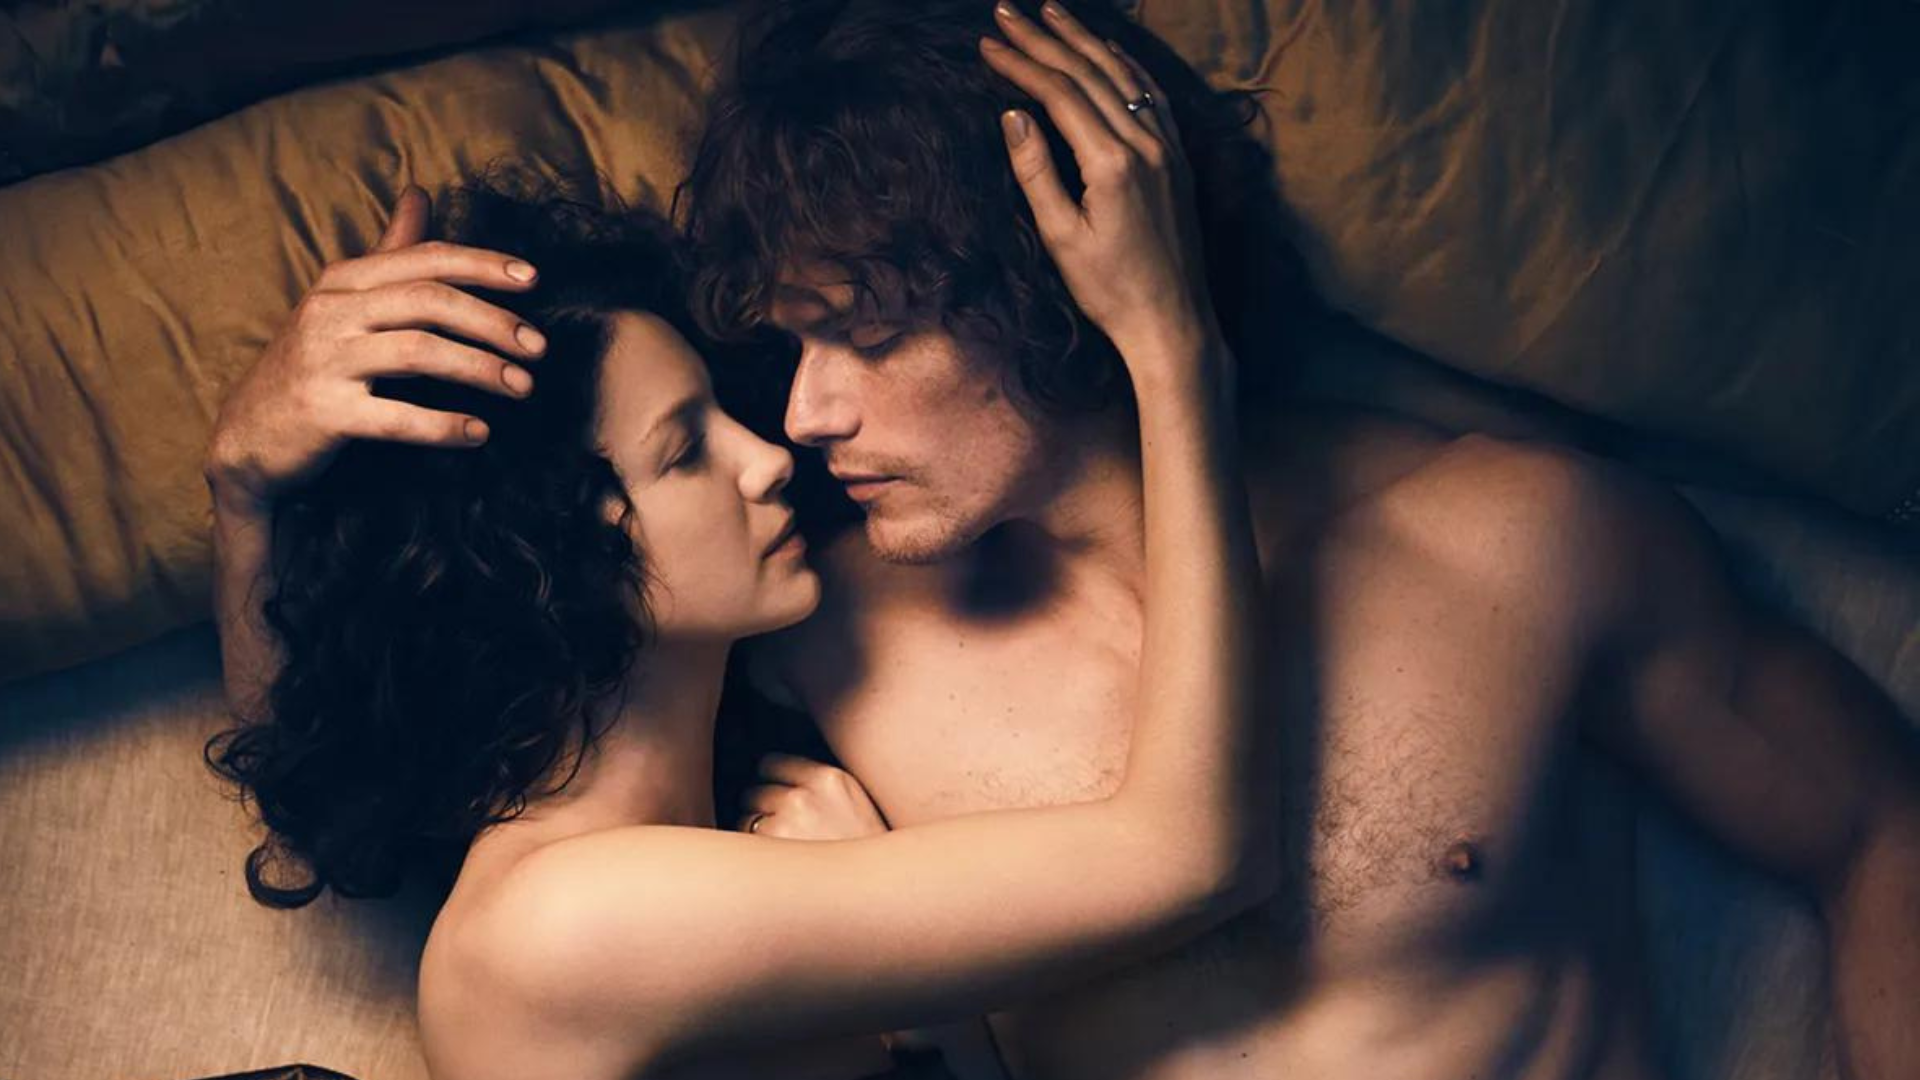 A naked man and woman looking at each other while lying in the bed